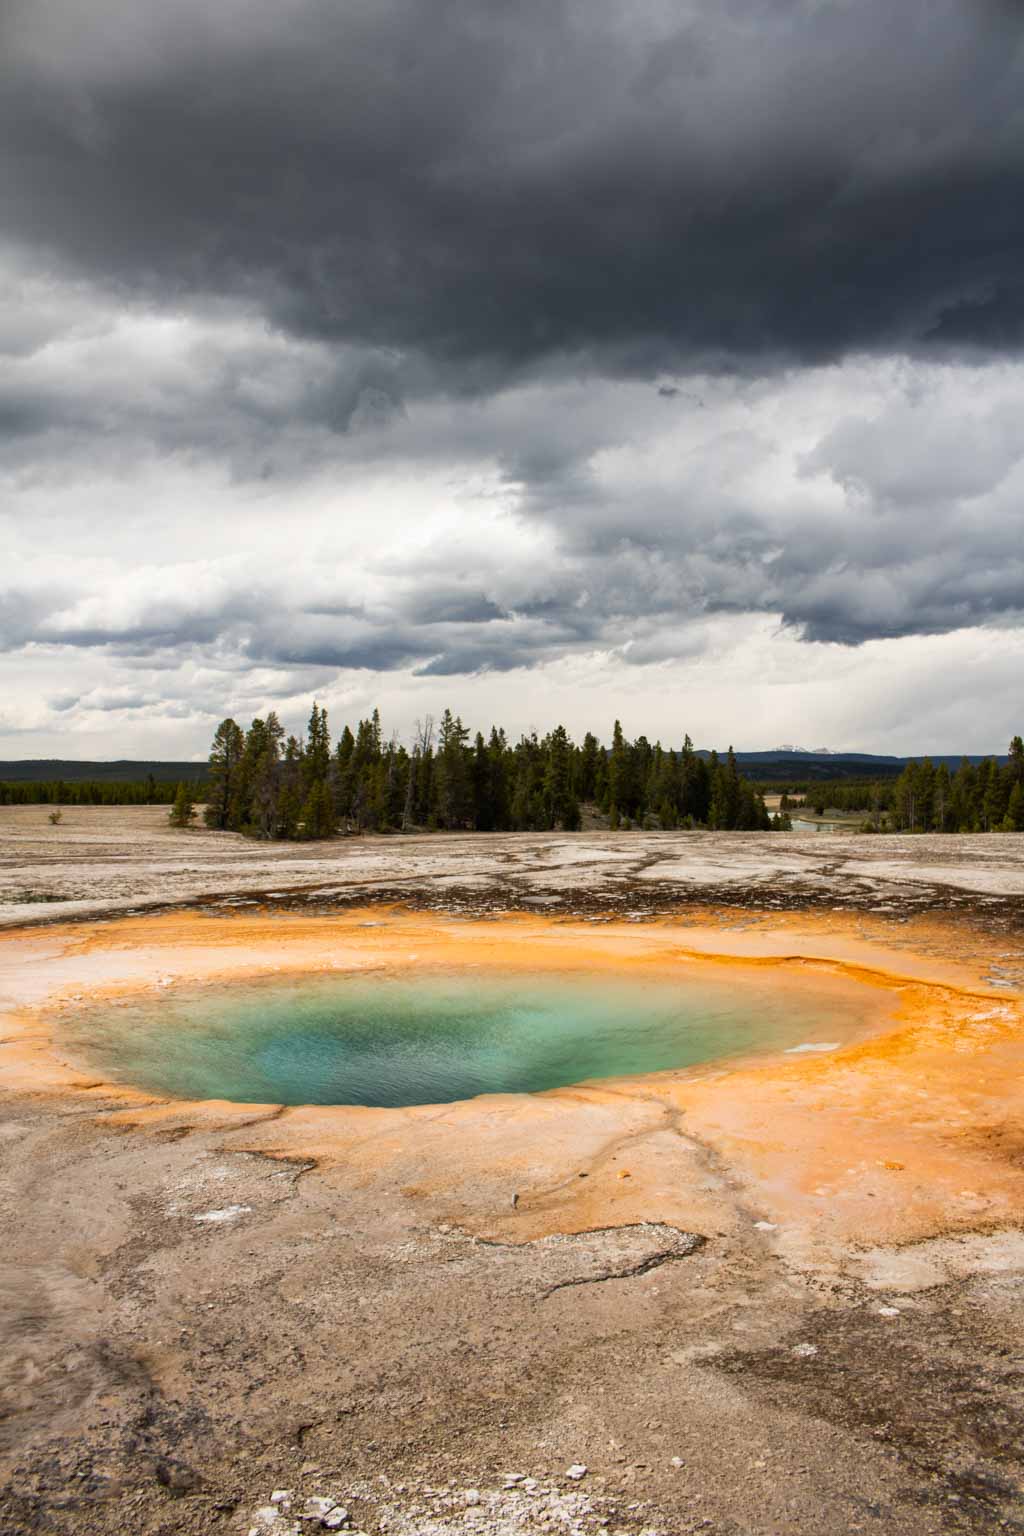 Opal Pool is a colorful hot spring at Midway Geyser Basin in Yellowstone National Park